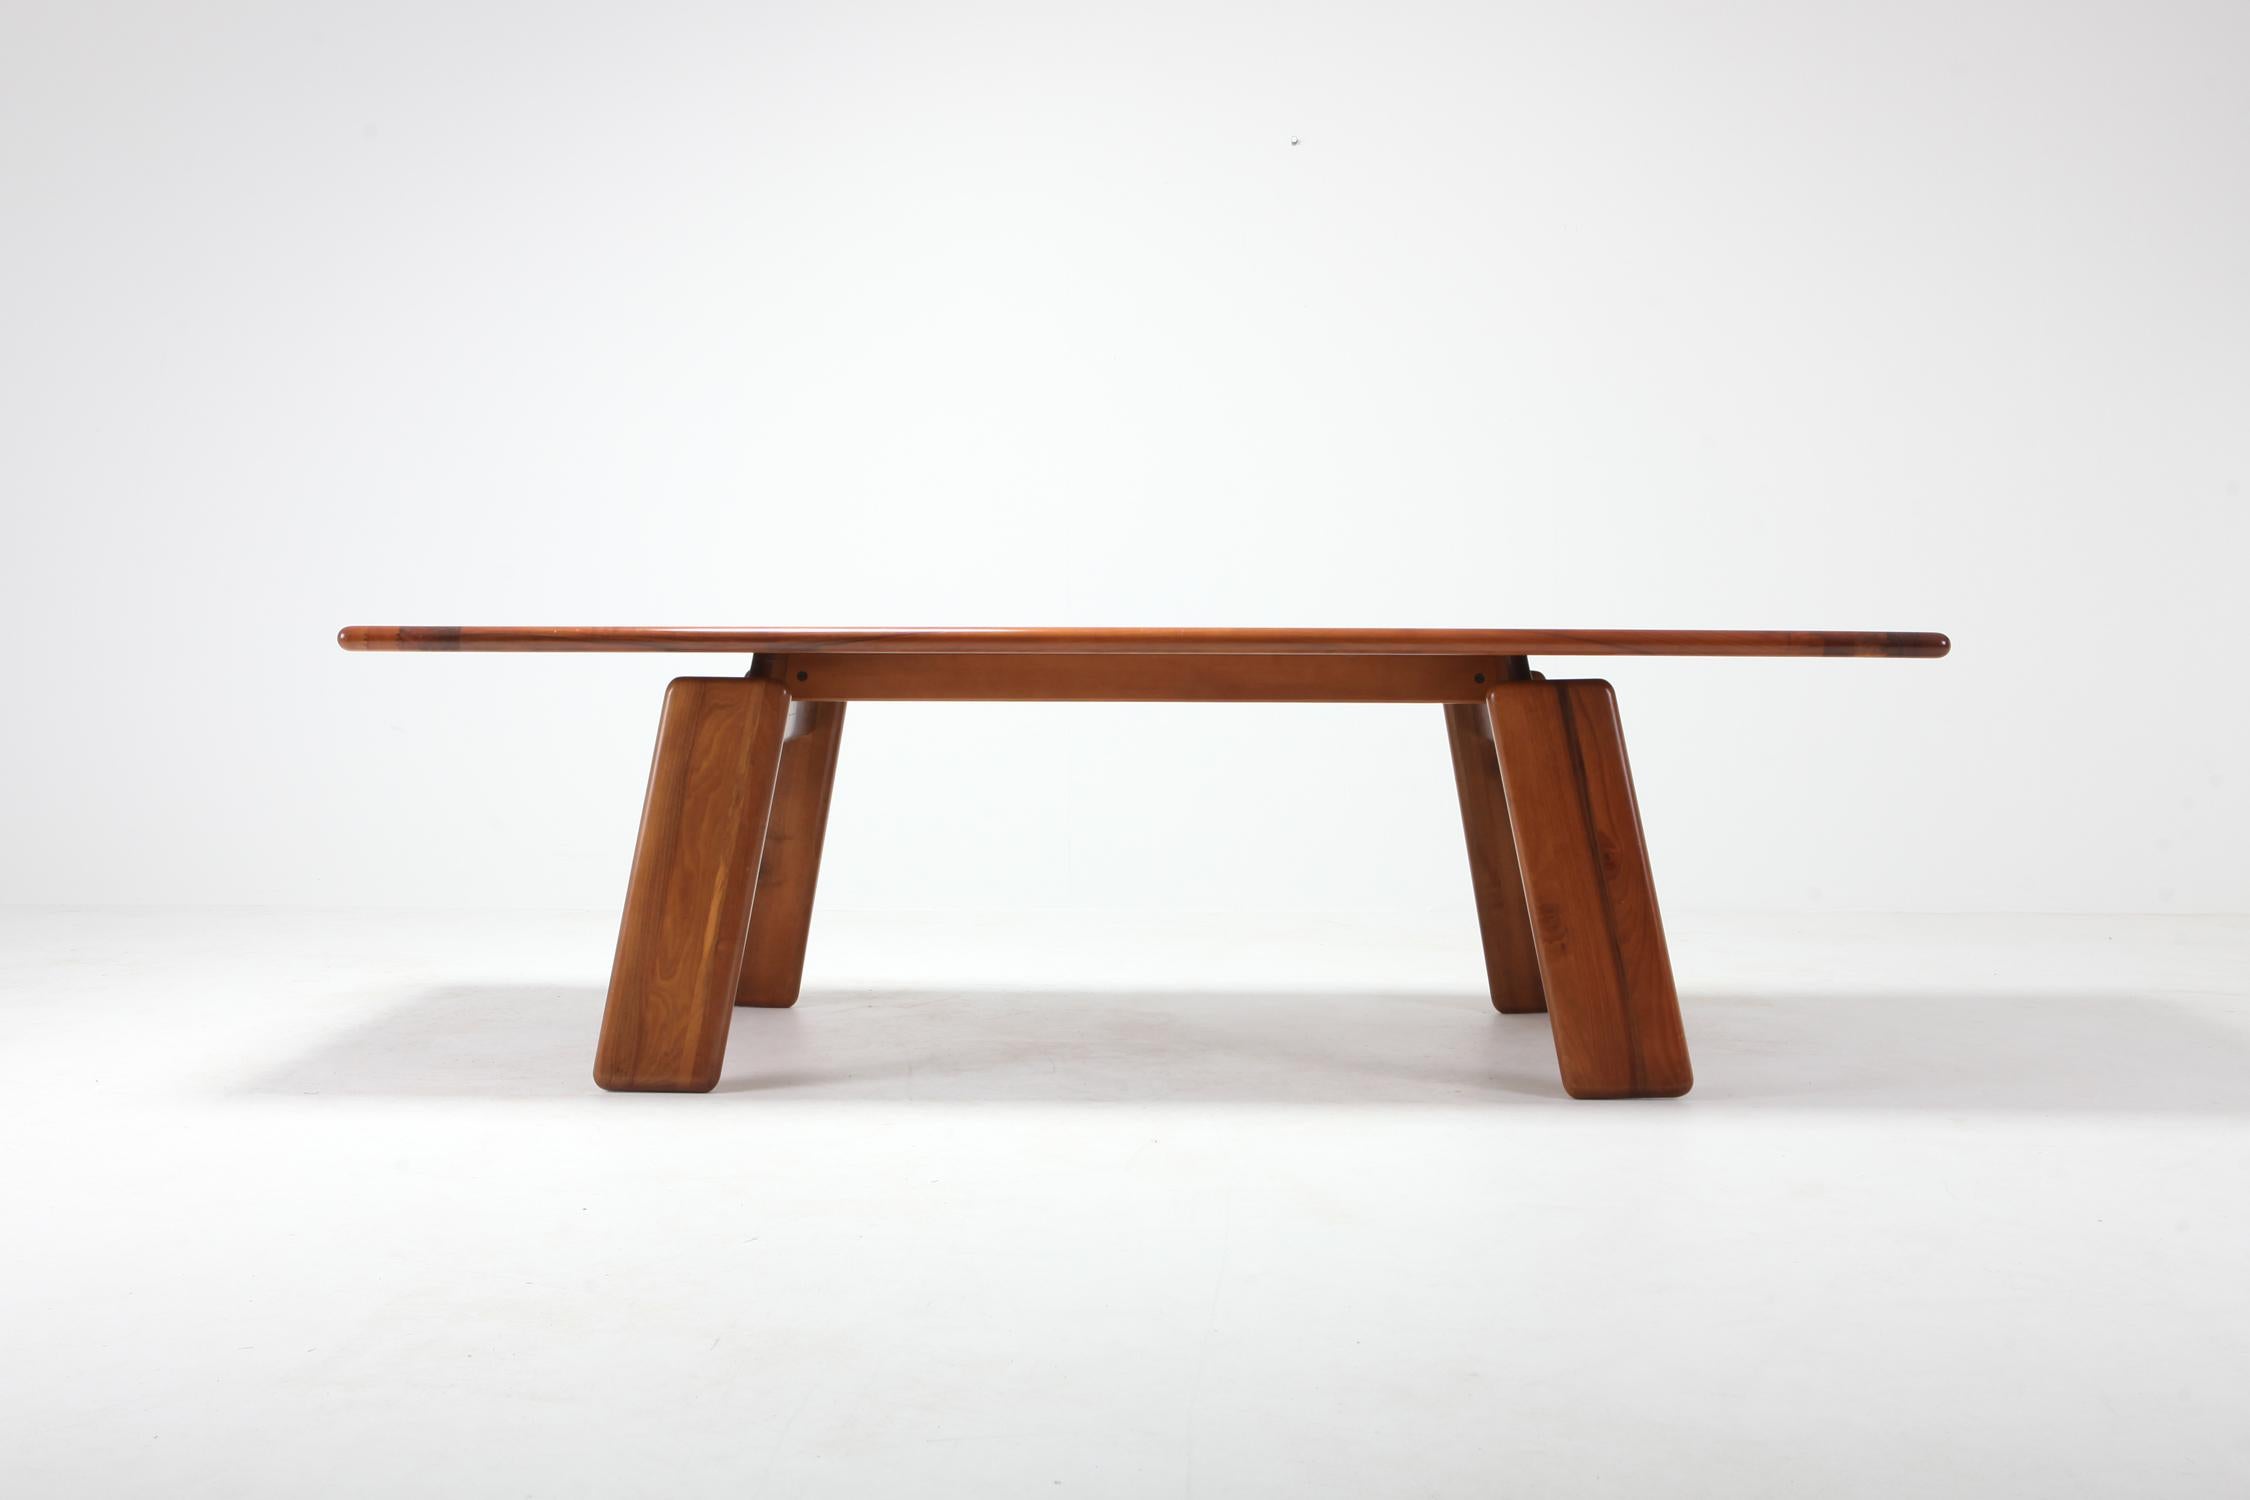 walnut dining table, model 'Sapporo' , Mario Marenco, Italy, 1970s

Amazingly beautiful pieces of walnut have been used to construct this postmodern piece.
through it's design the table top kind of floats over the trapezoid base.

Check out our